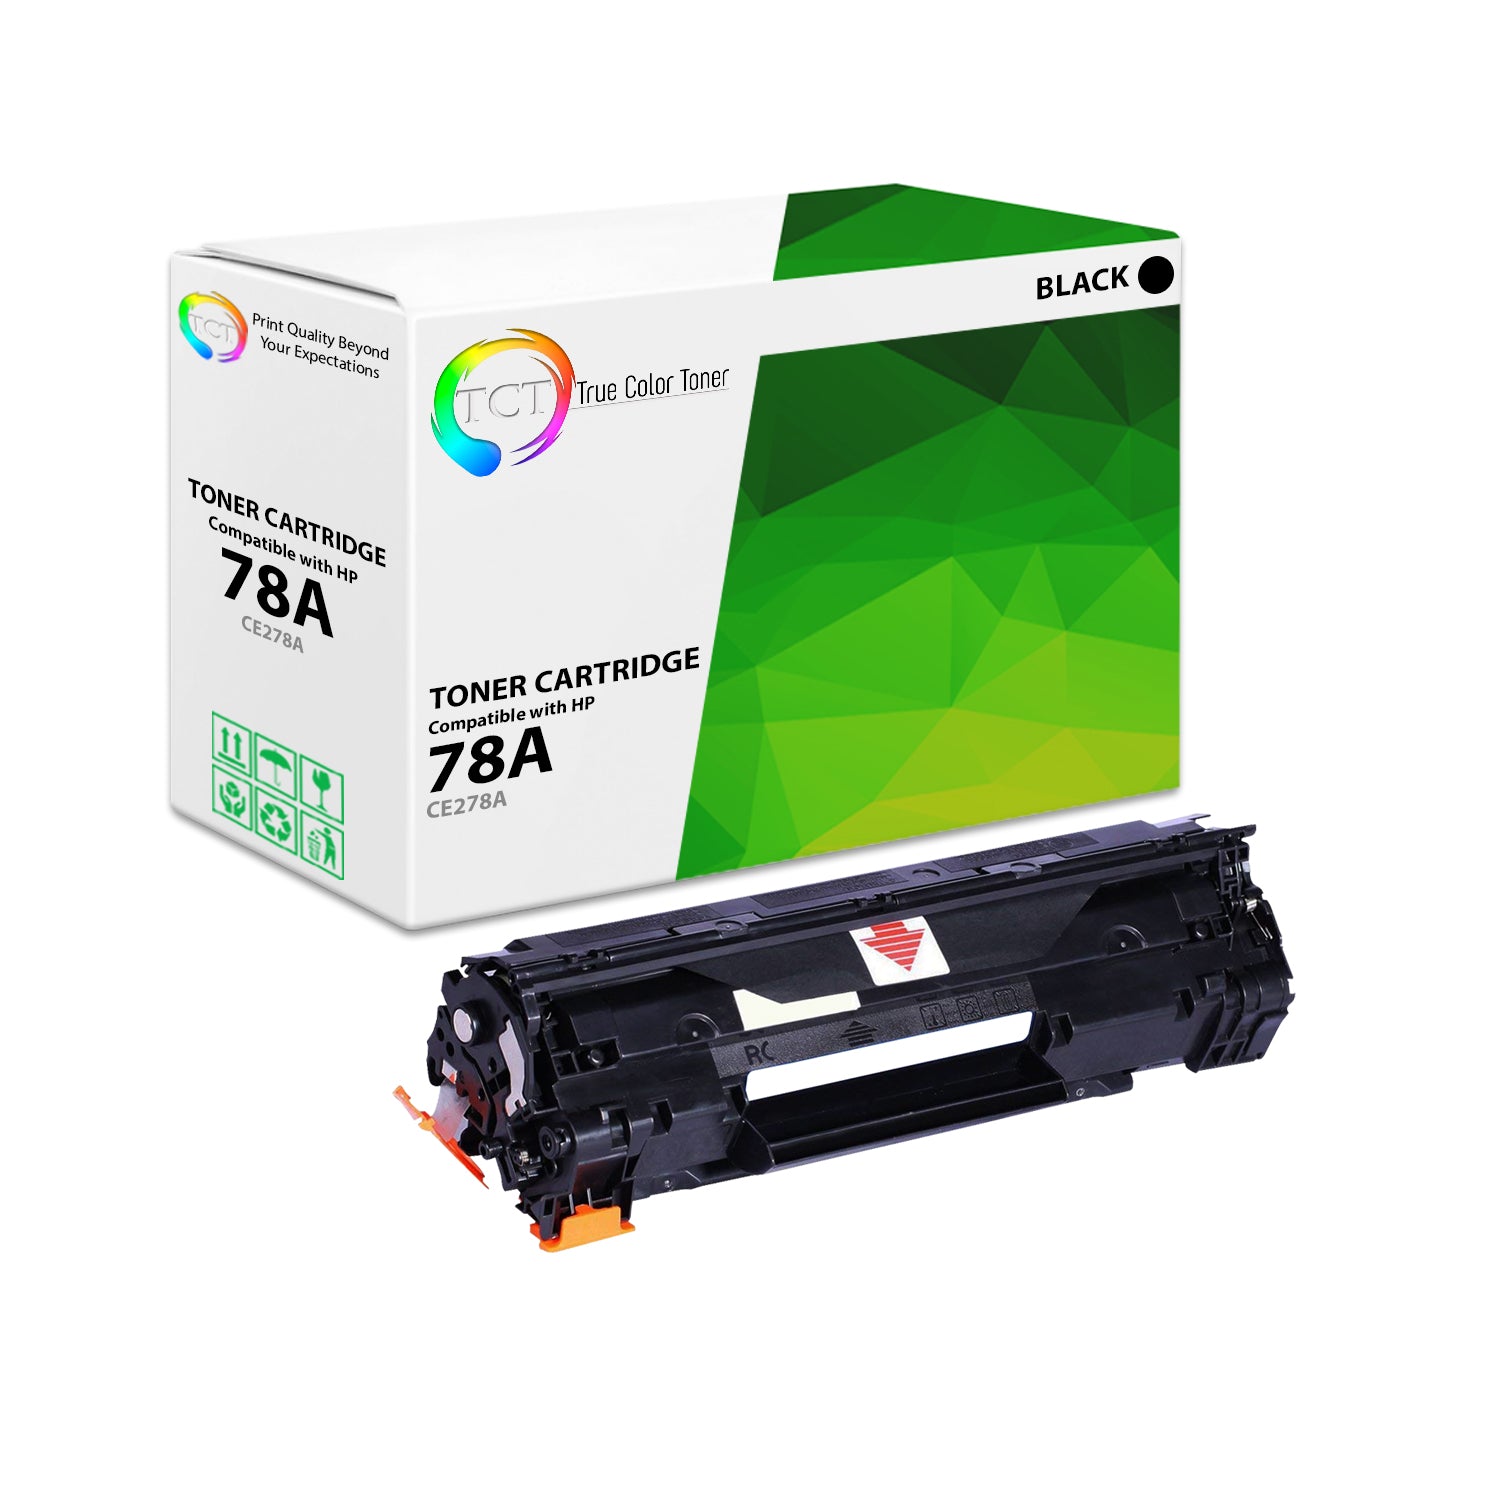 TCT Compatible Toner Cartridge Replacement for the HP 78A Series - 1 Pack Black